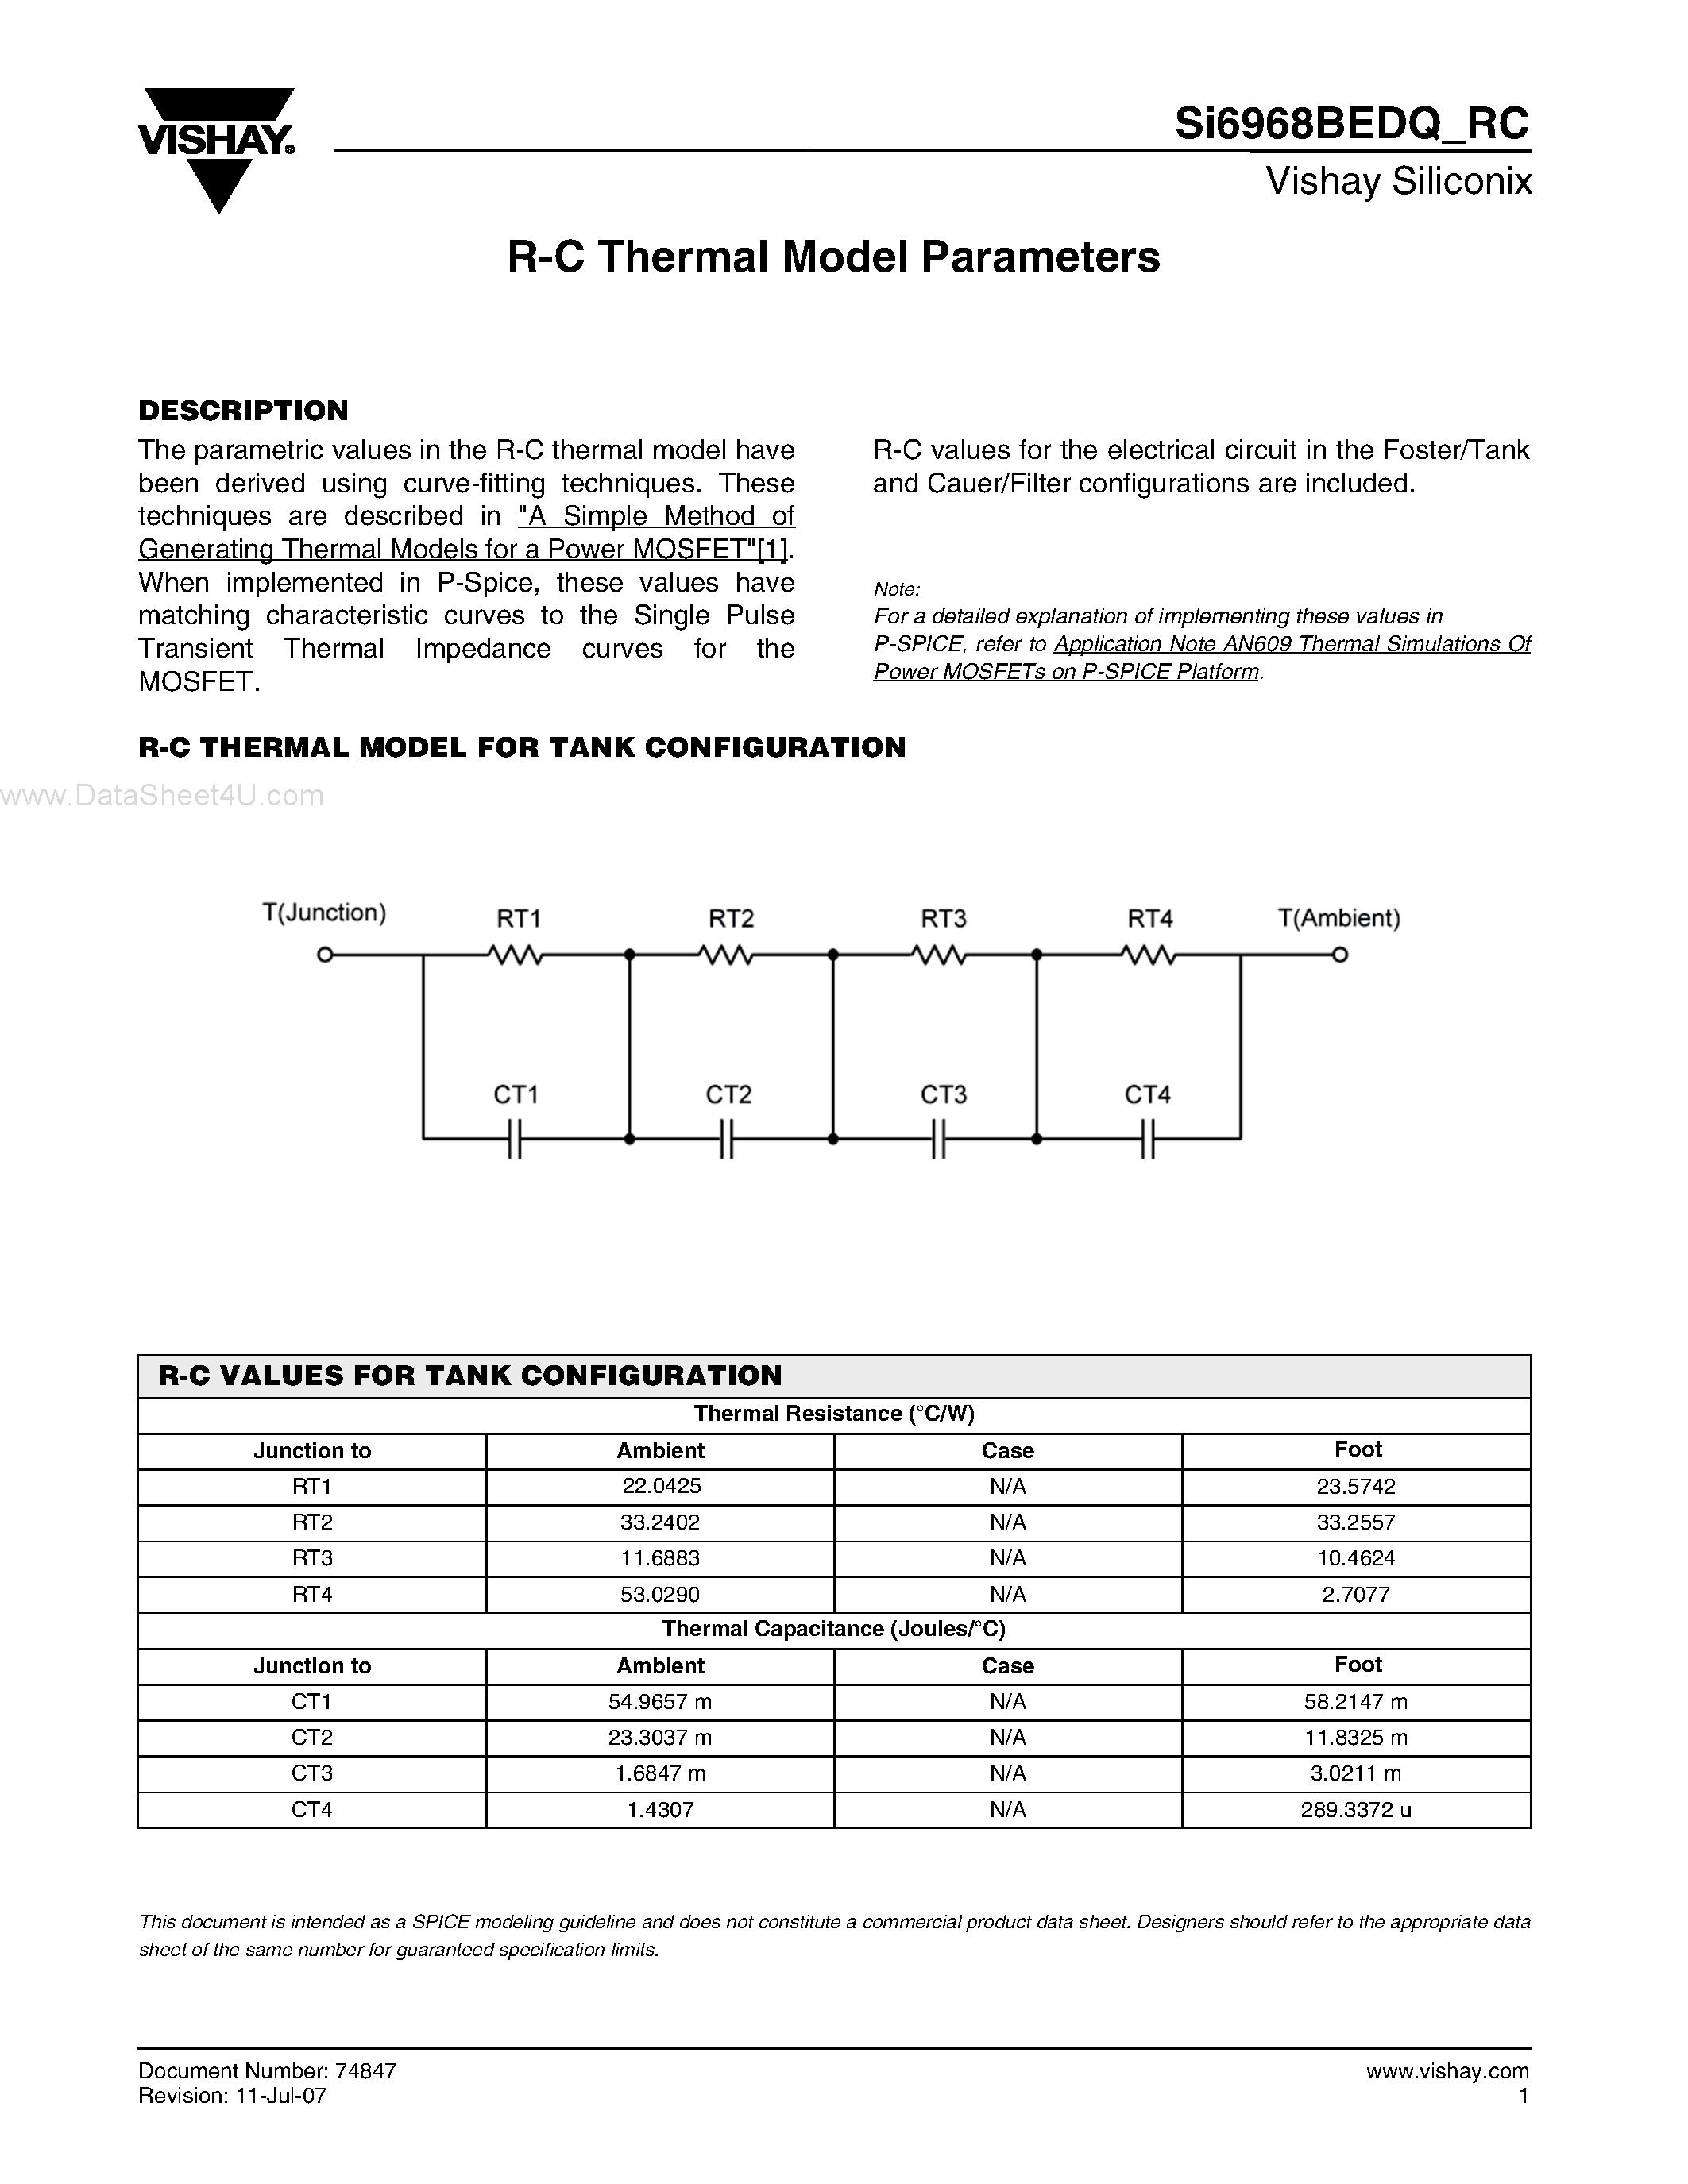 Datasheet SI6968BEDQ_RC - R-C Thermal Model Parameters page 1